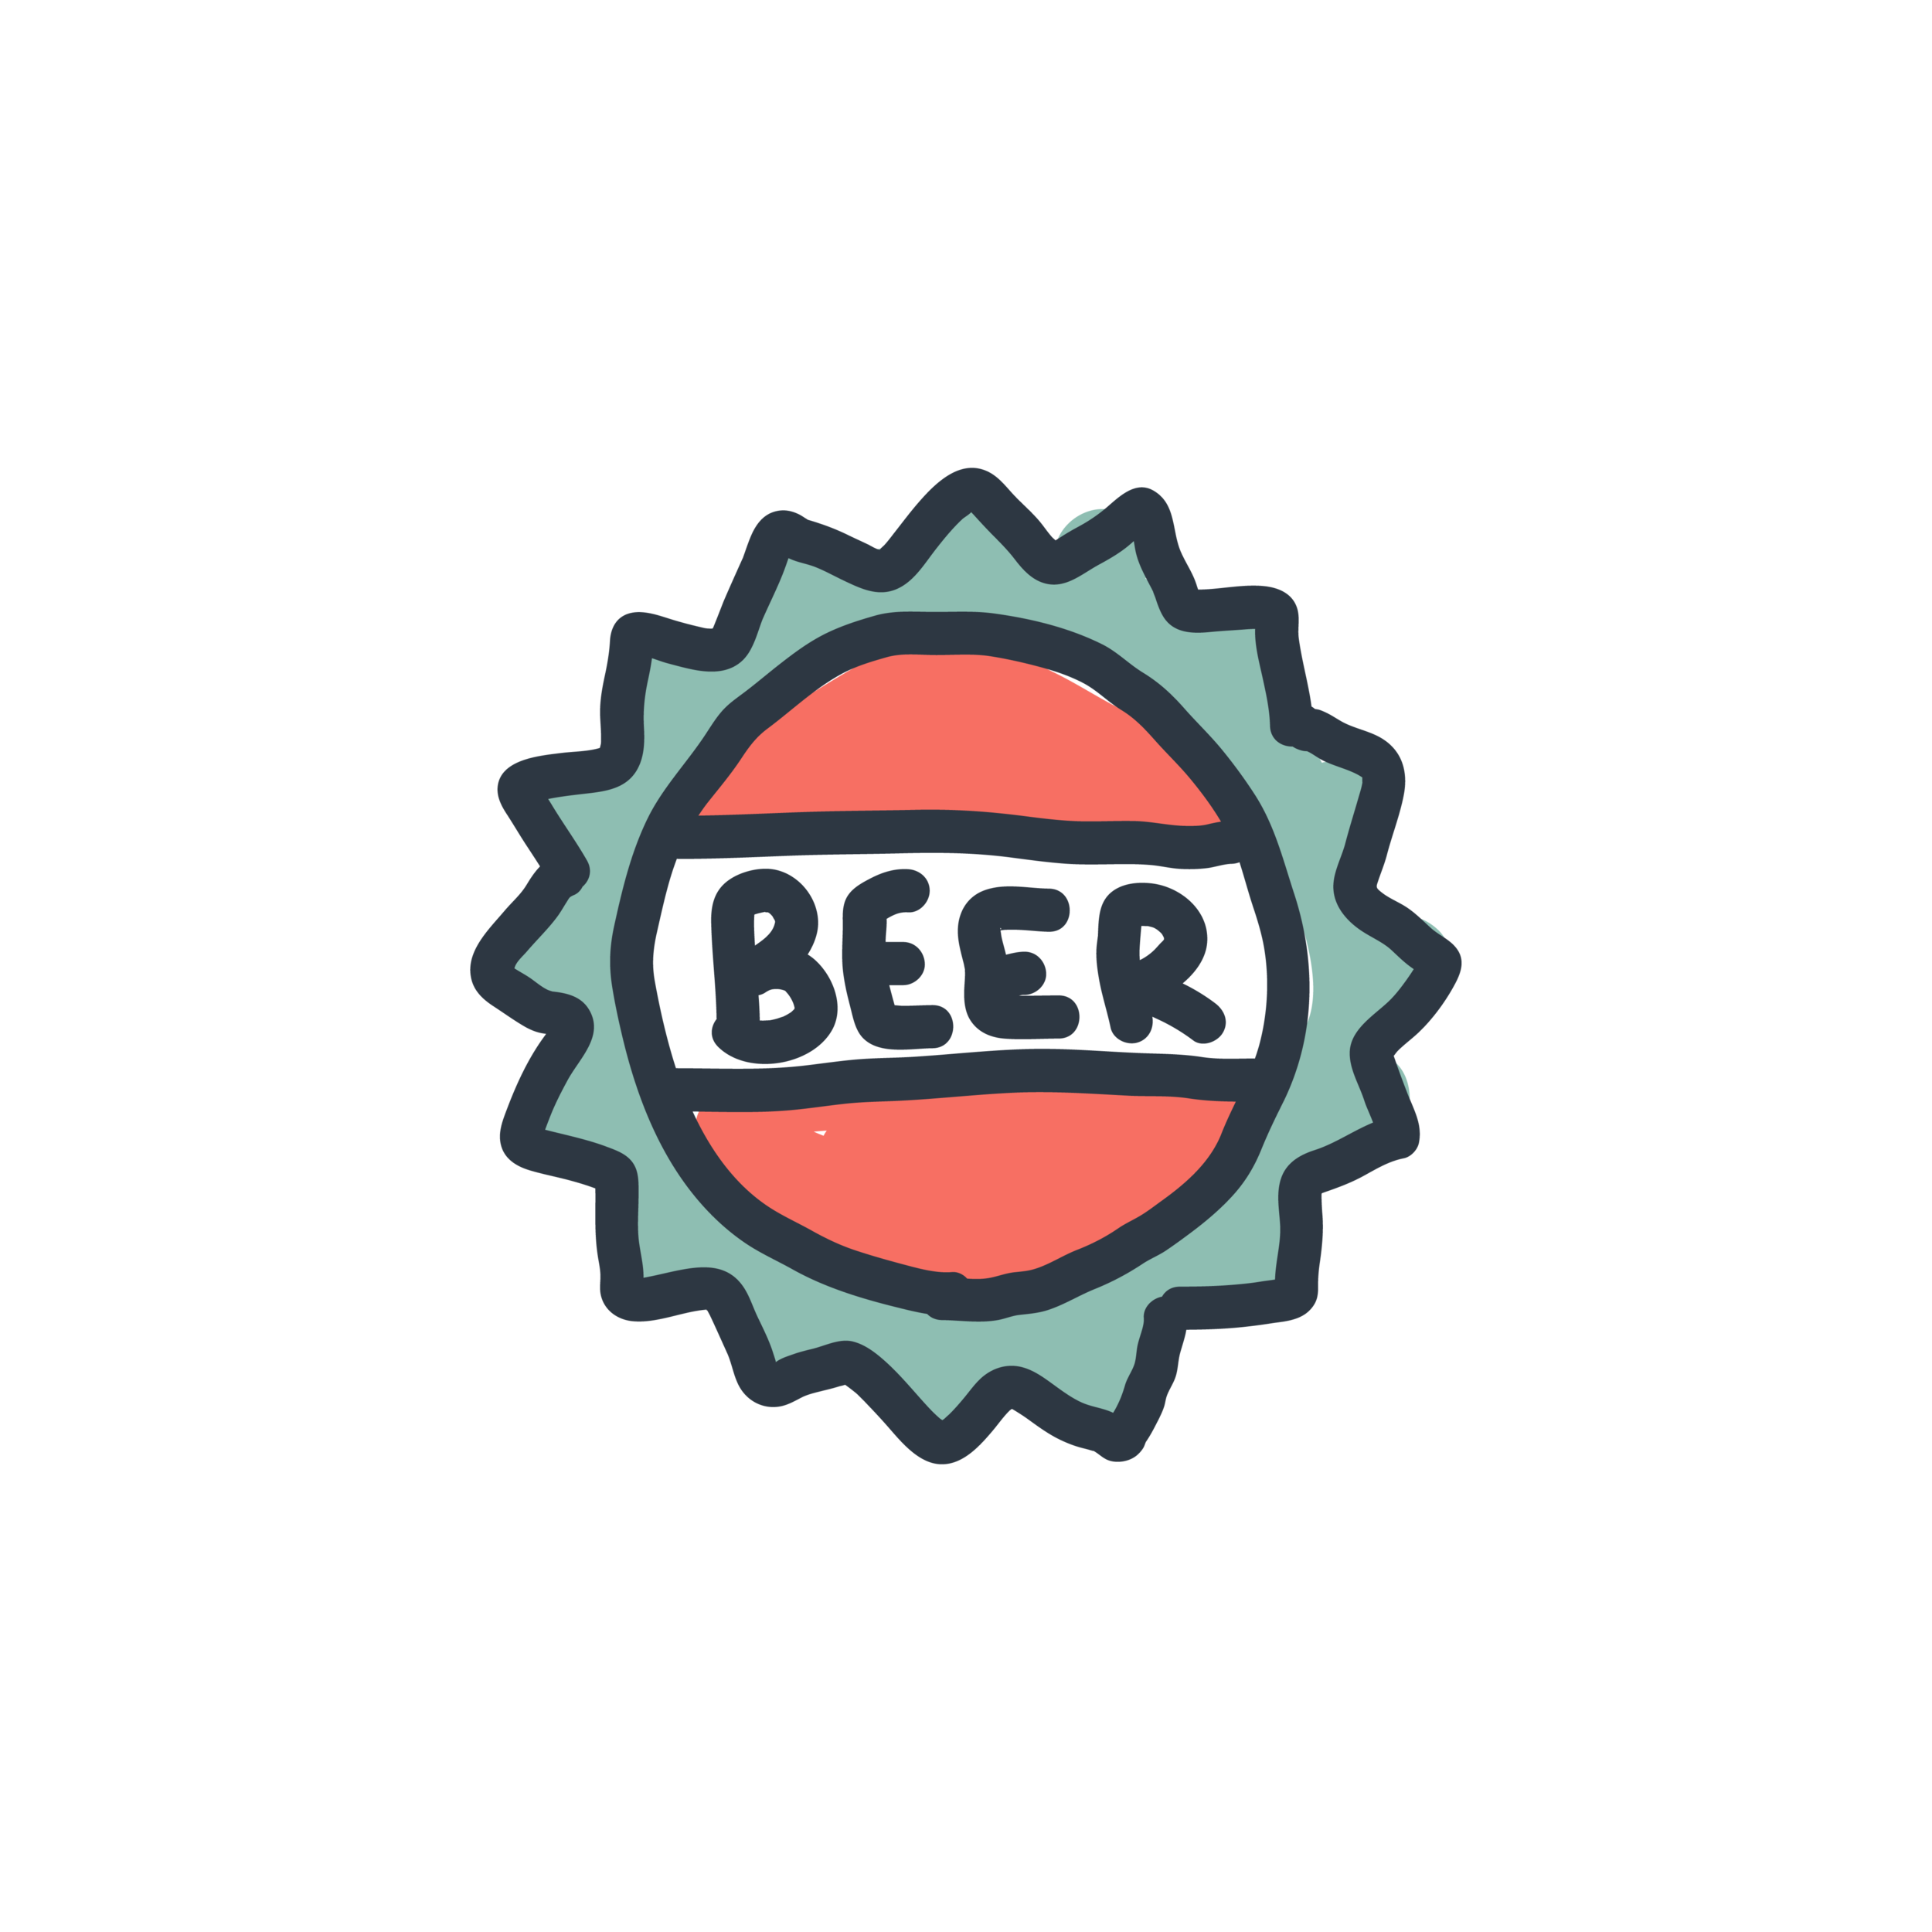 TBR_Icon-BeerLabel.png